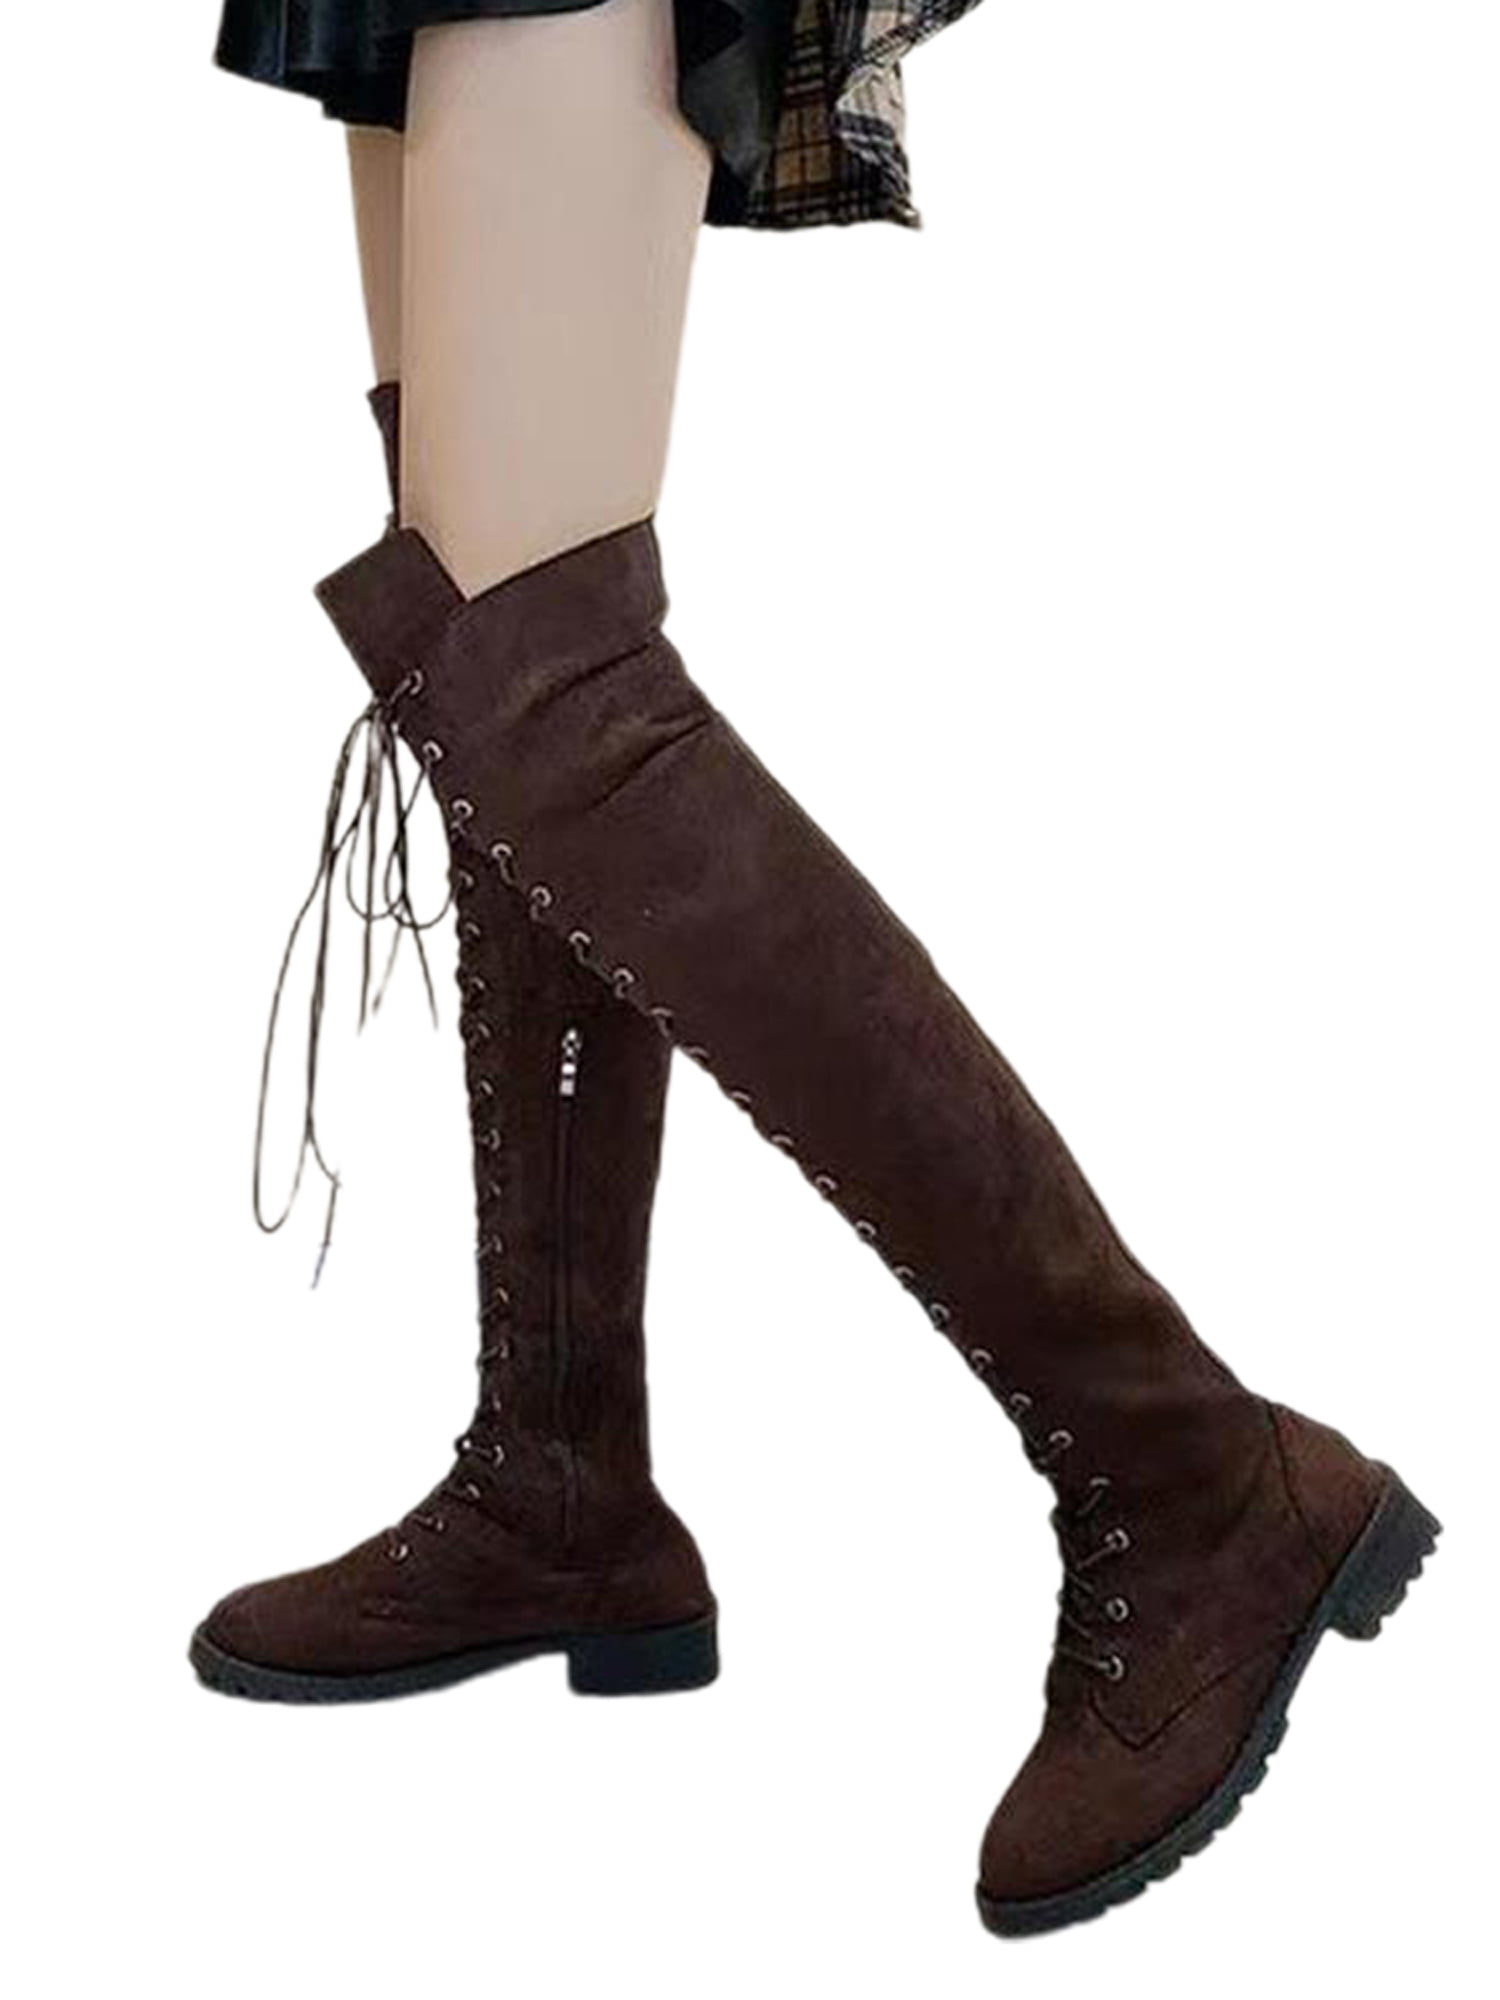 Womens Ladies Thigh High Boots Over The Knee High Party Lace Up Flats Shoes Size 